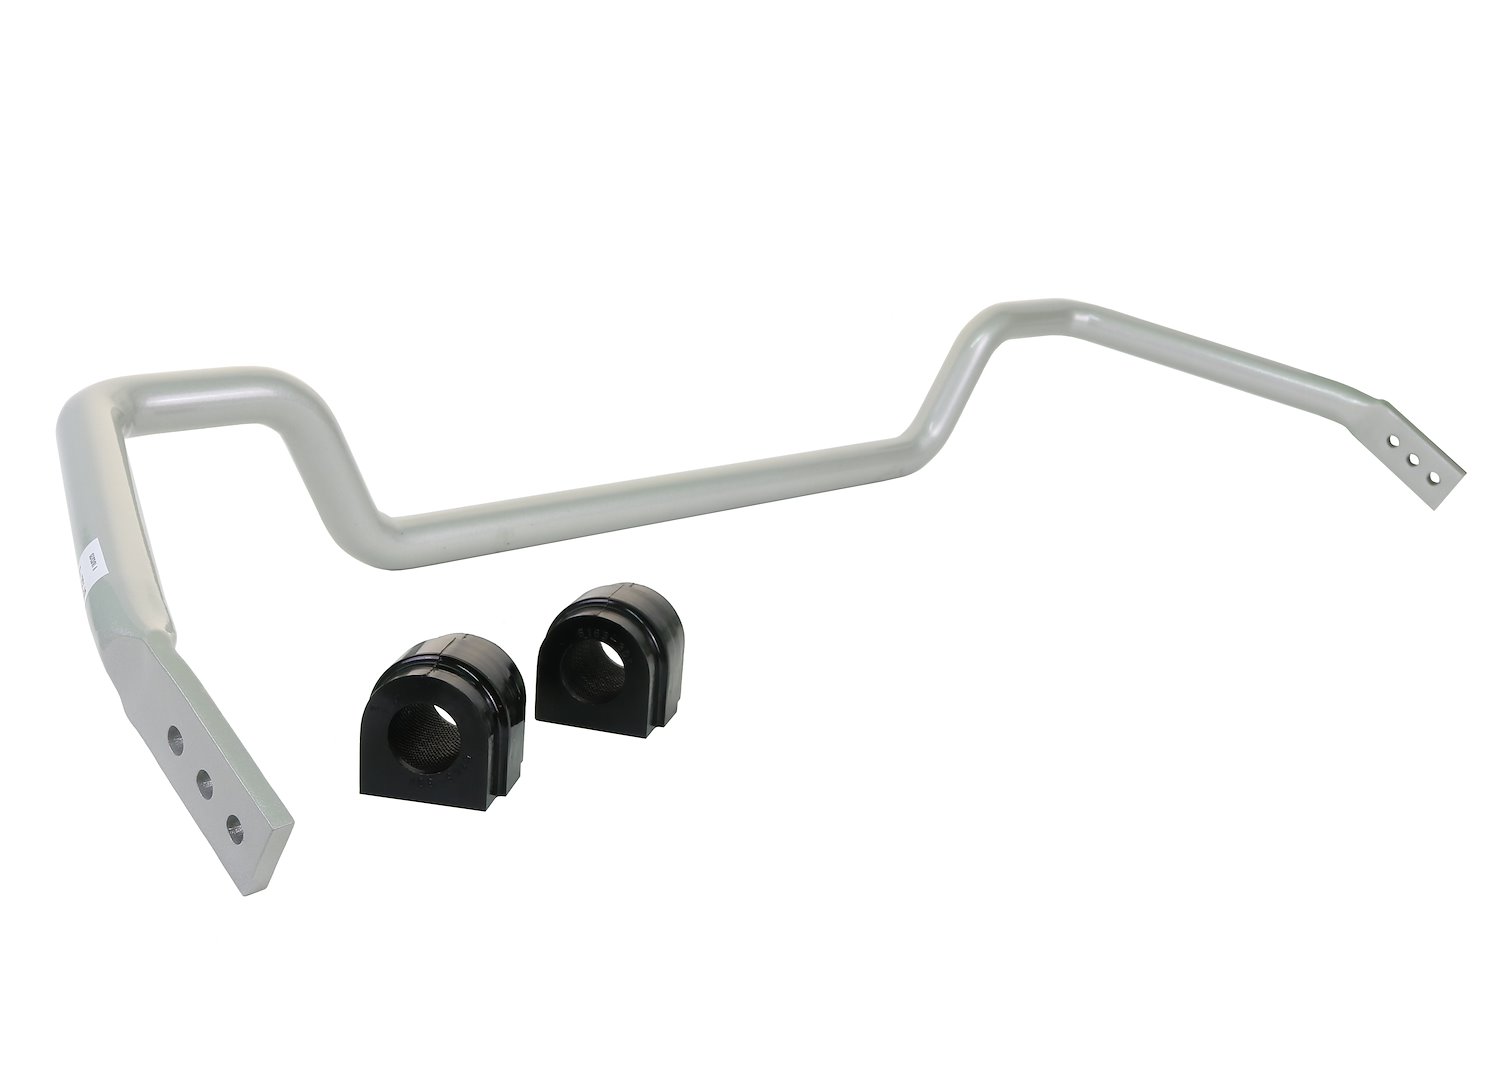 BBF15Z Front Heavy Duty Adjustable 30 mm Sway Bar Fits Select 1999-2006 BMW Models